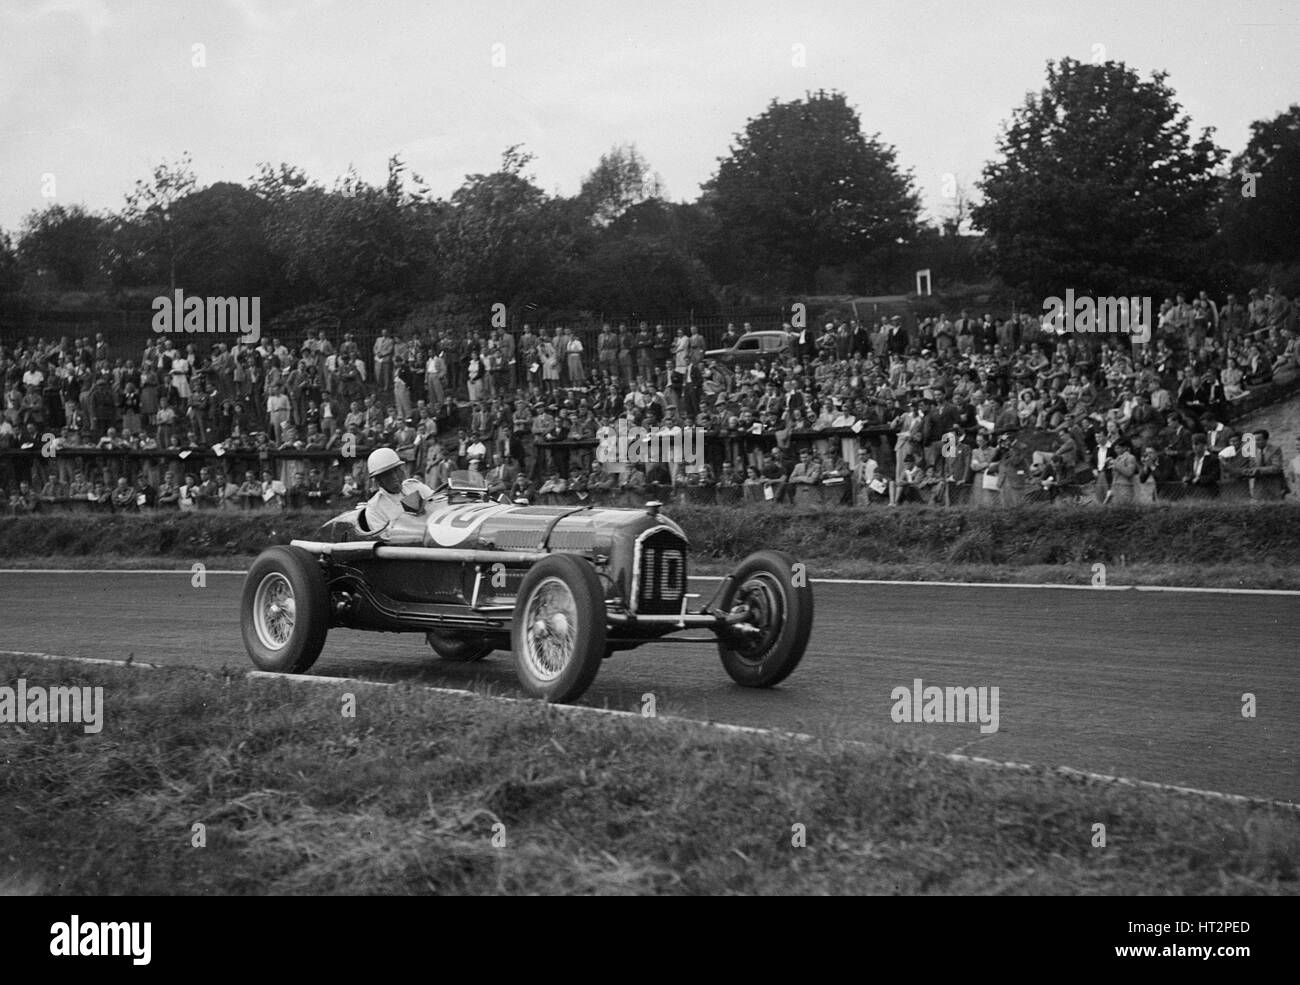 Alfa Romeo of Kenneth Evans racing at Crystal Palace, London, 1939. Artist: Bill Brunell. Stock Photo